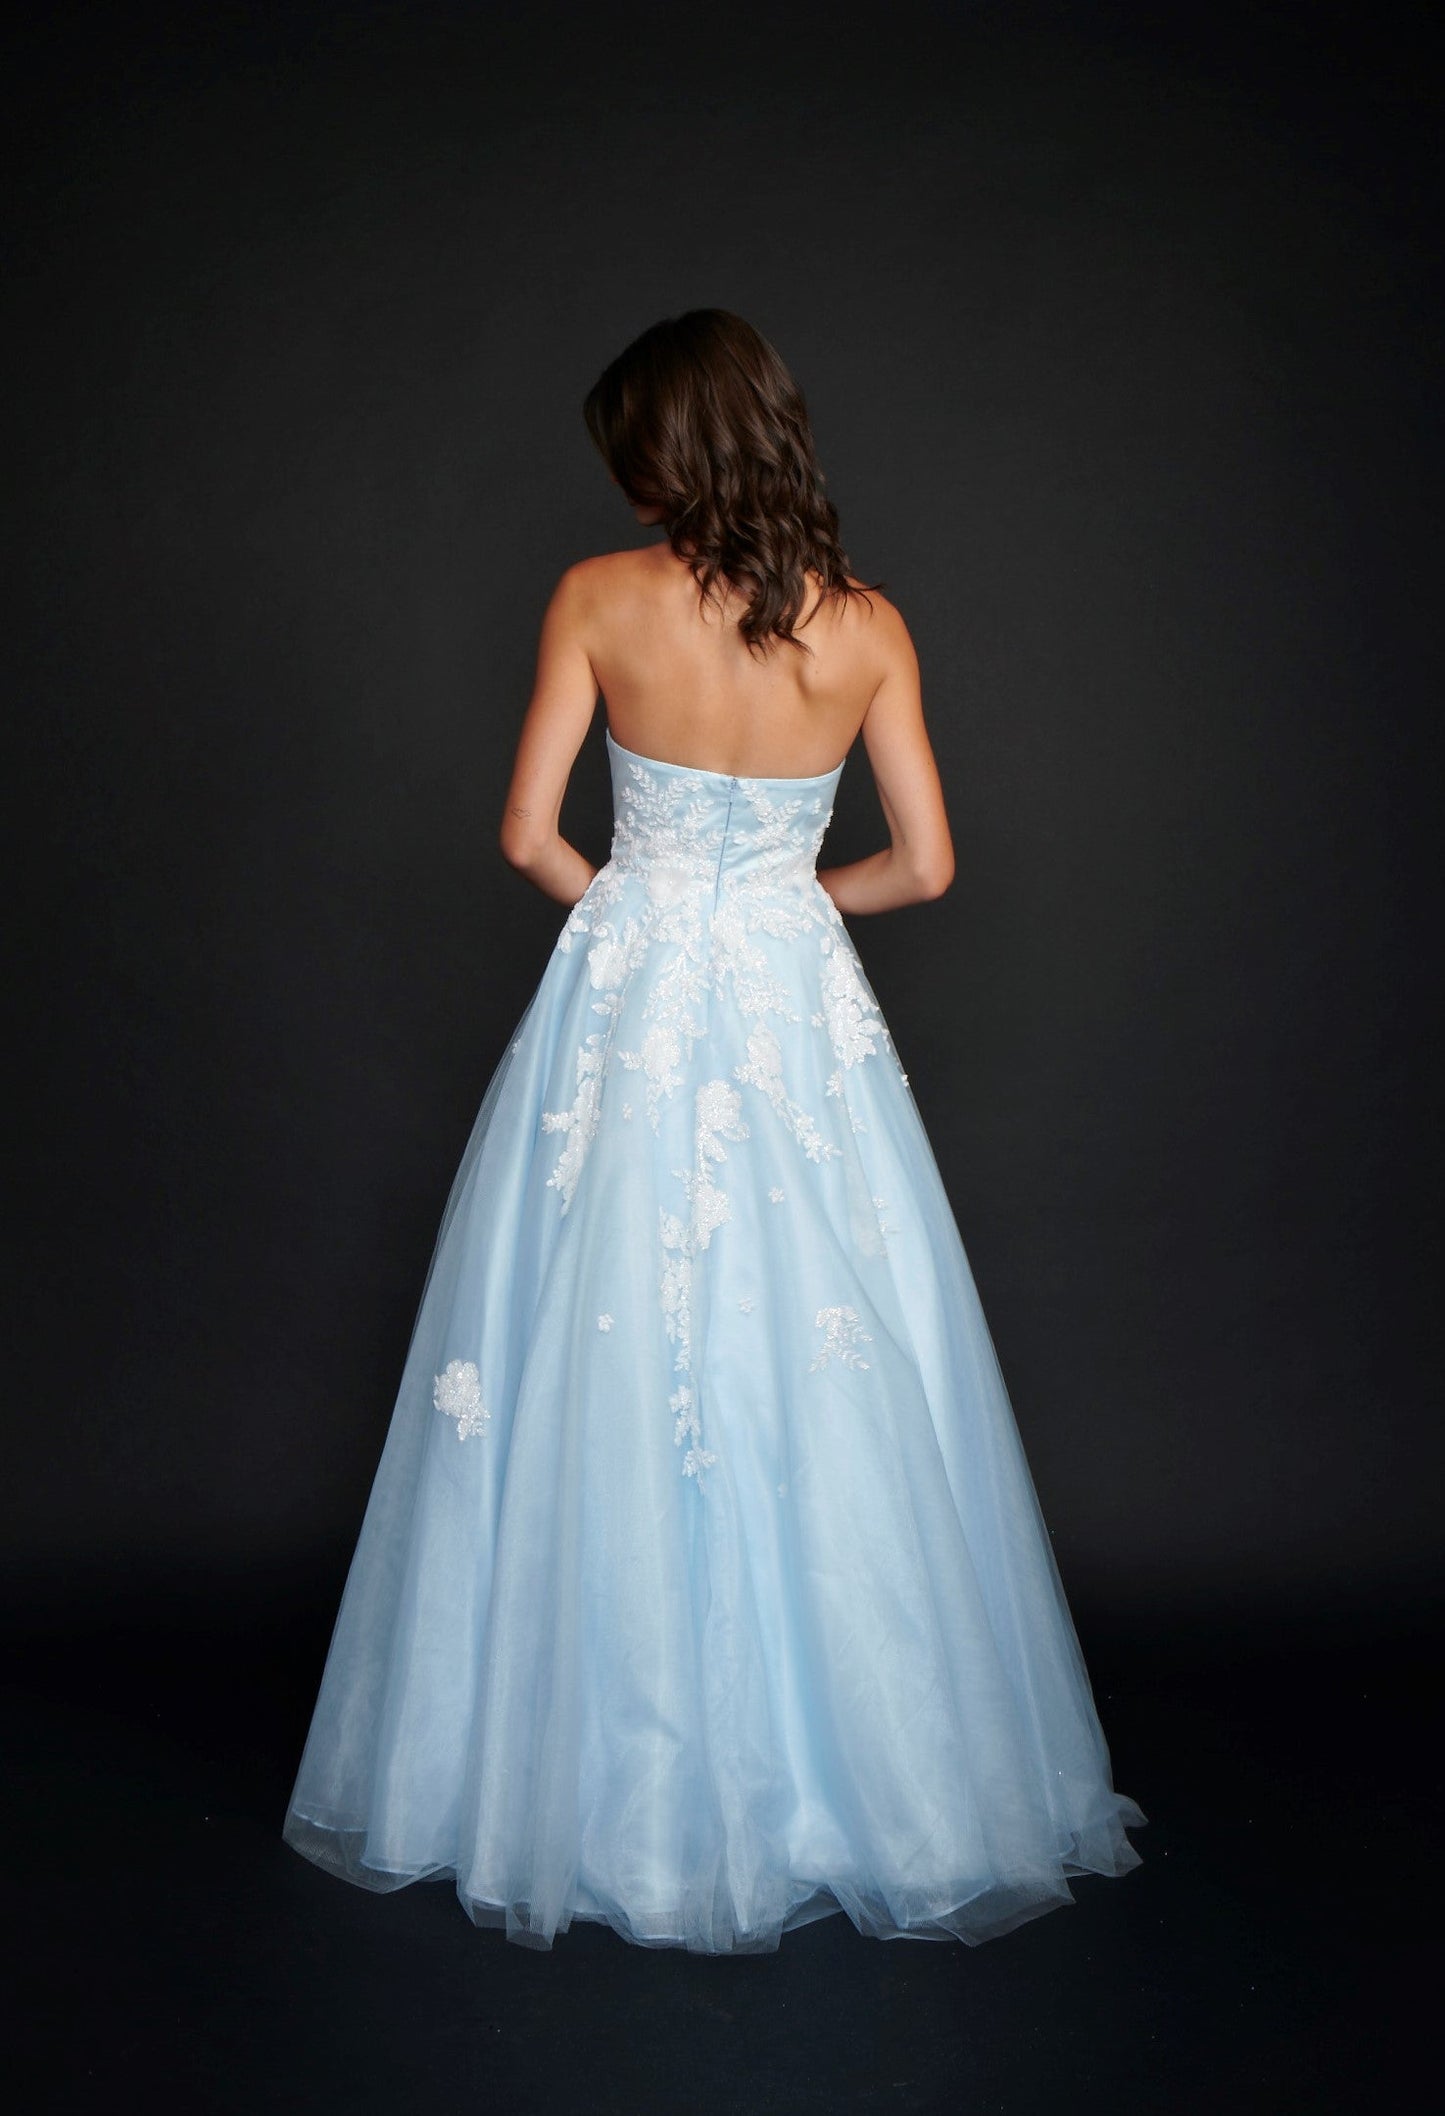 Nina Canacci 9137  This is a strapless ballgown with a sweetheart neckline and 3D floral appliques on the bodice and streaming down the dress. It is good for a Wedding dress or Prom Gown.   Available Size- 4-18  Available Color- Baby Blue, Ivory